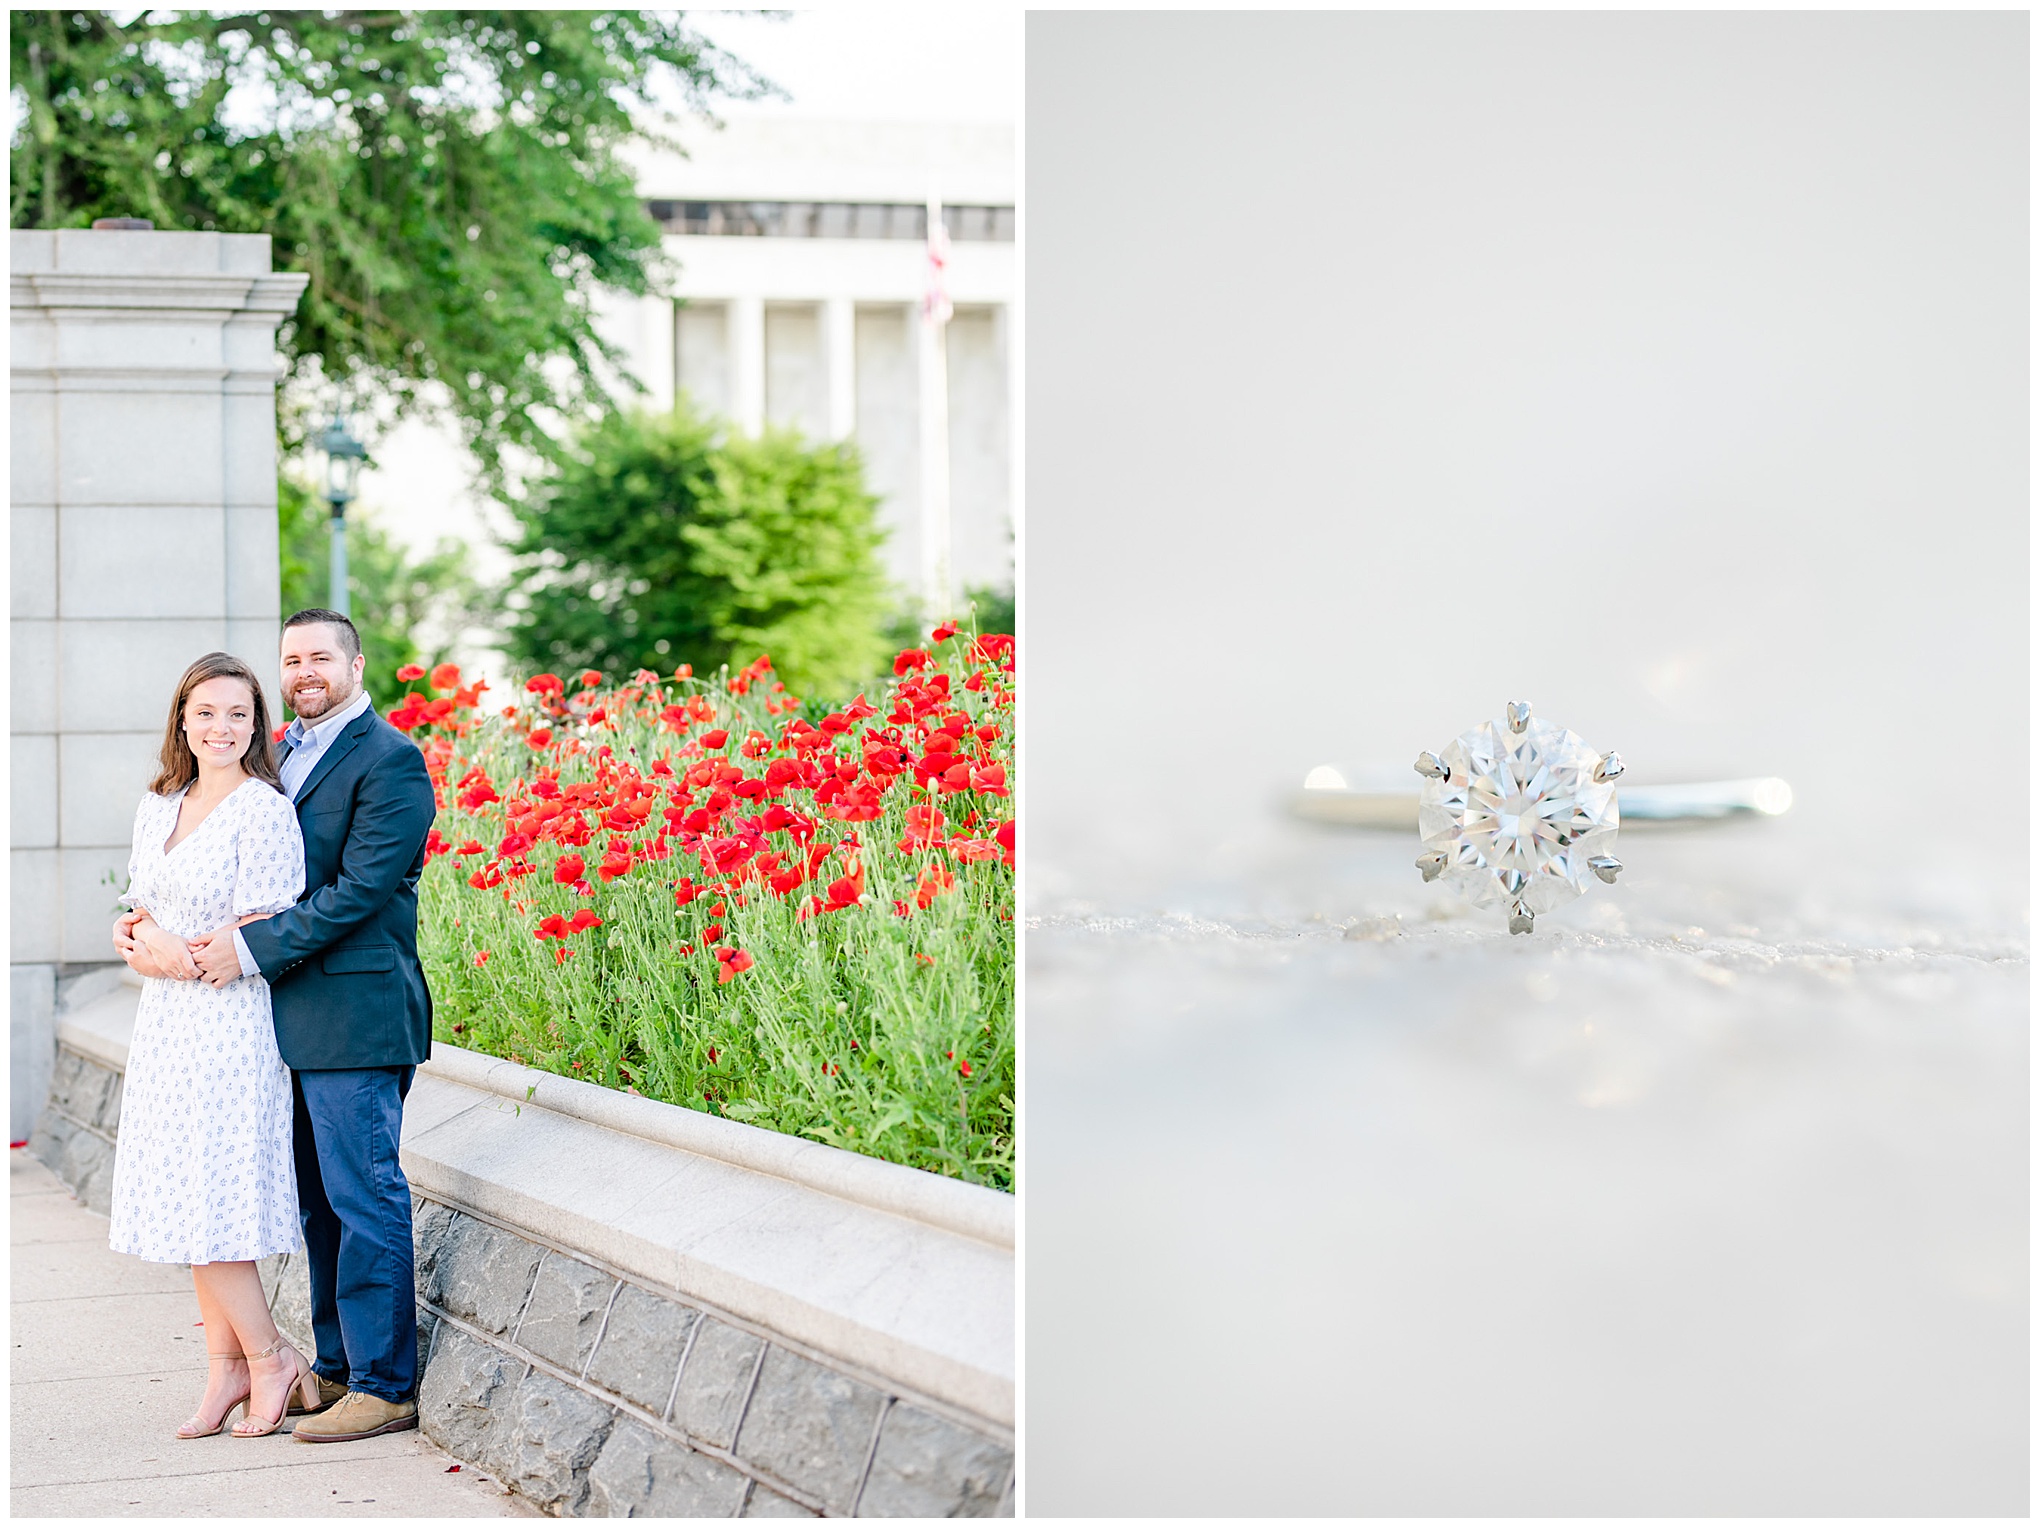 Capitol Hill engagement session, Capitol Hill portraits, D.C. engagement photography, D.C. engagement photographer, D.C. Capitol Hill D.C., DC photography, engagement photography, Rachel E.H. Photography, classic engagement photos, spring engagement photos, round solitaire engagement ring